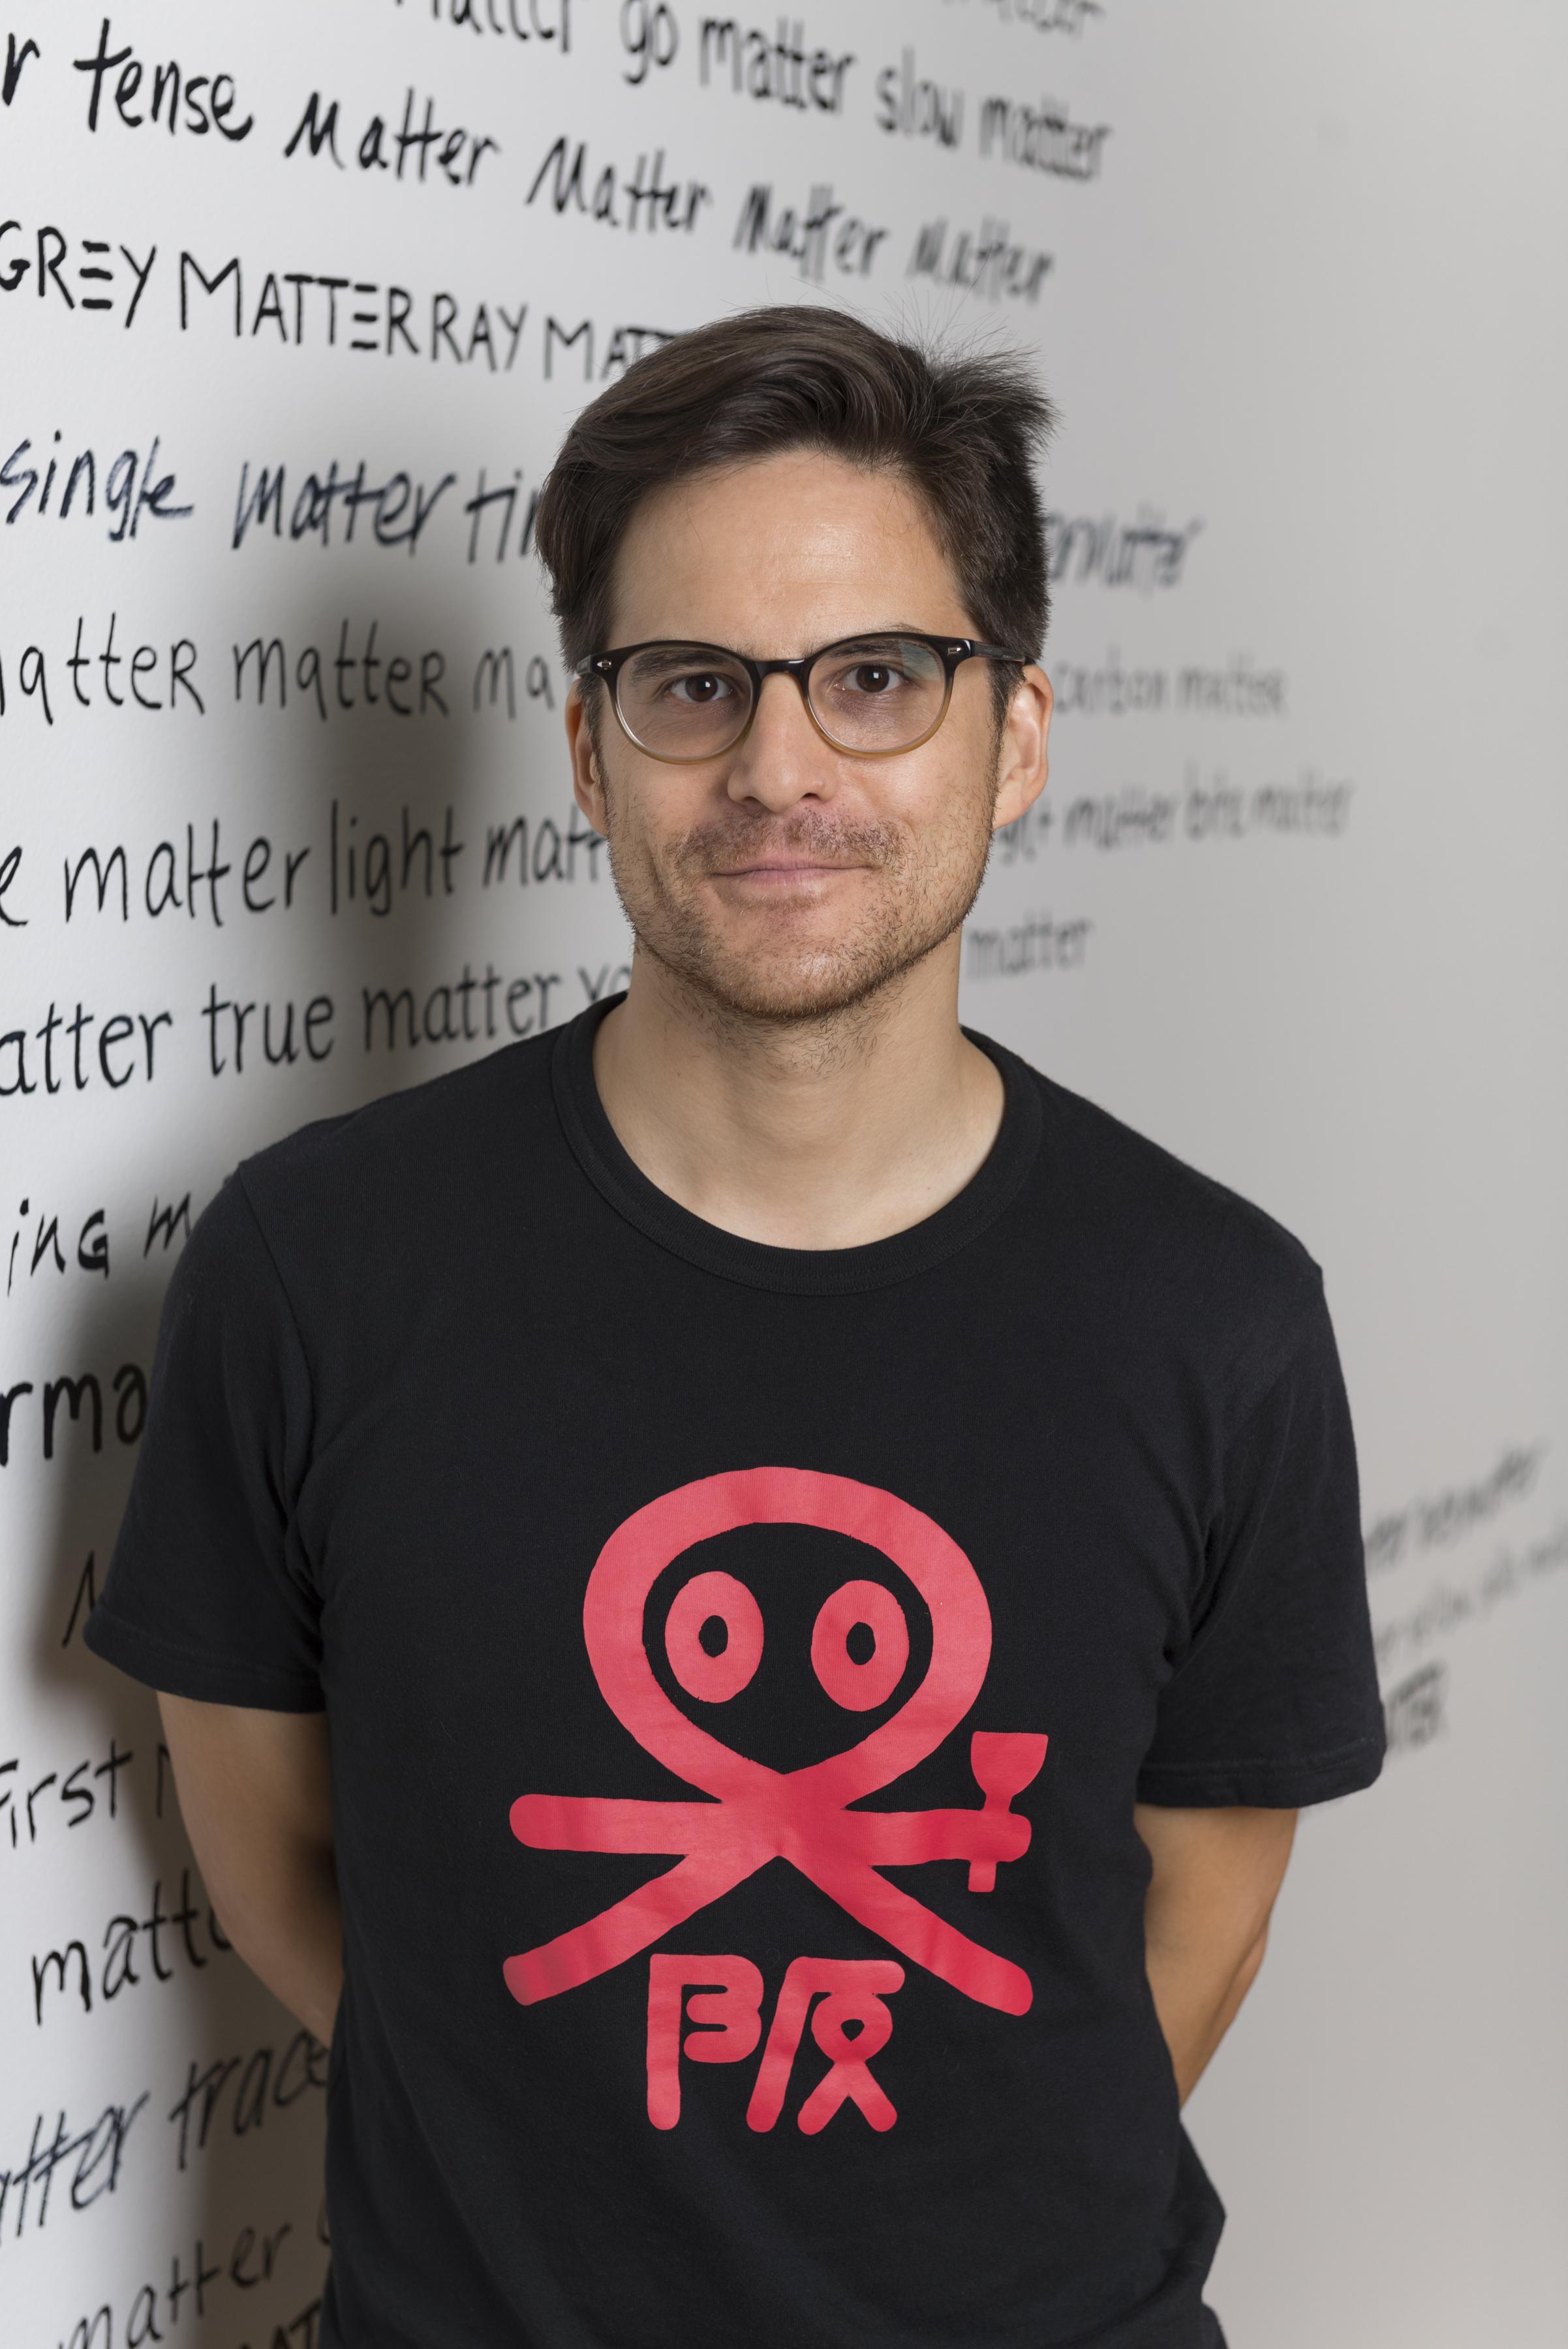 A man wearing glasses and a black t-shirt stands in front of a wall with text written in various scripts repeatedly saying "matter" in addition to adjectives such as "single," "true," and "slow."